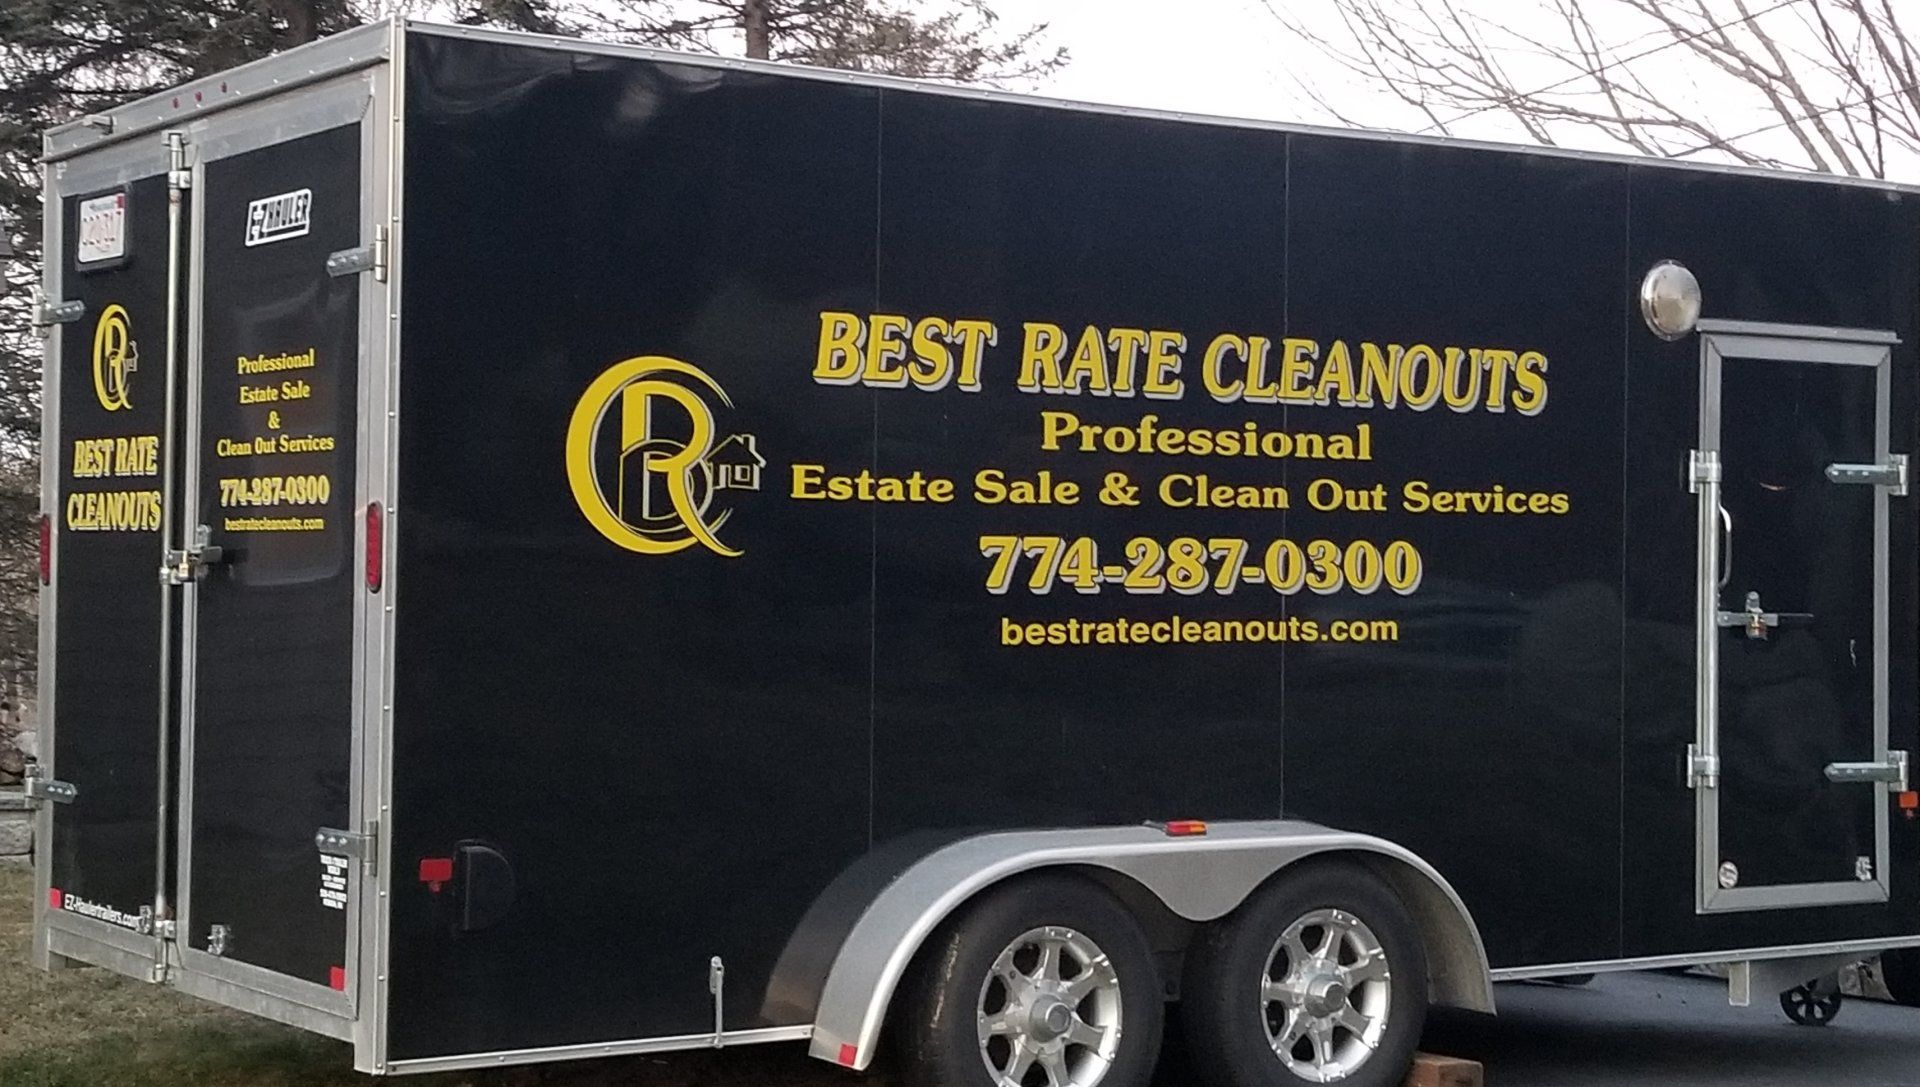 Best Rate Cleanouts Truck